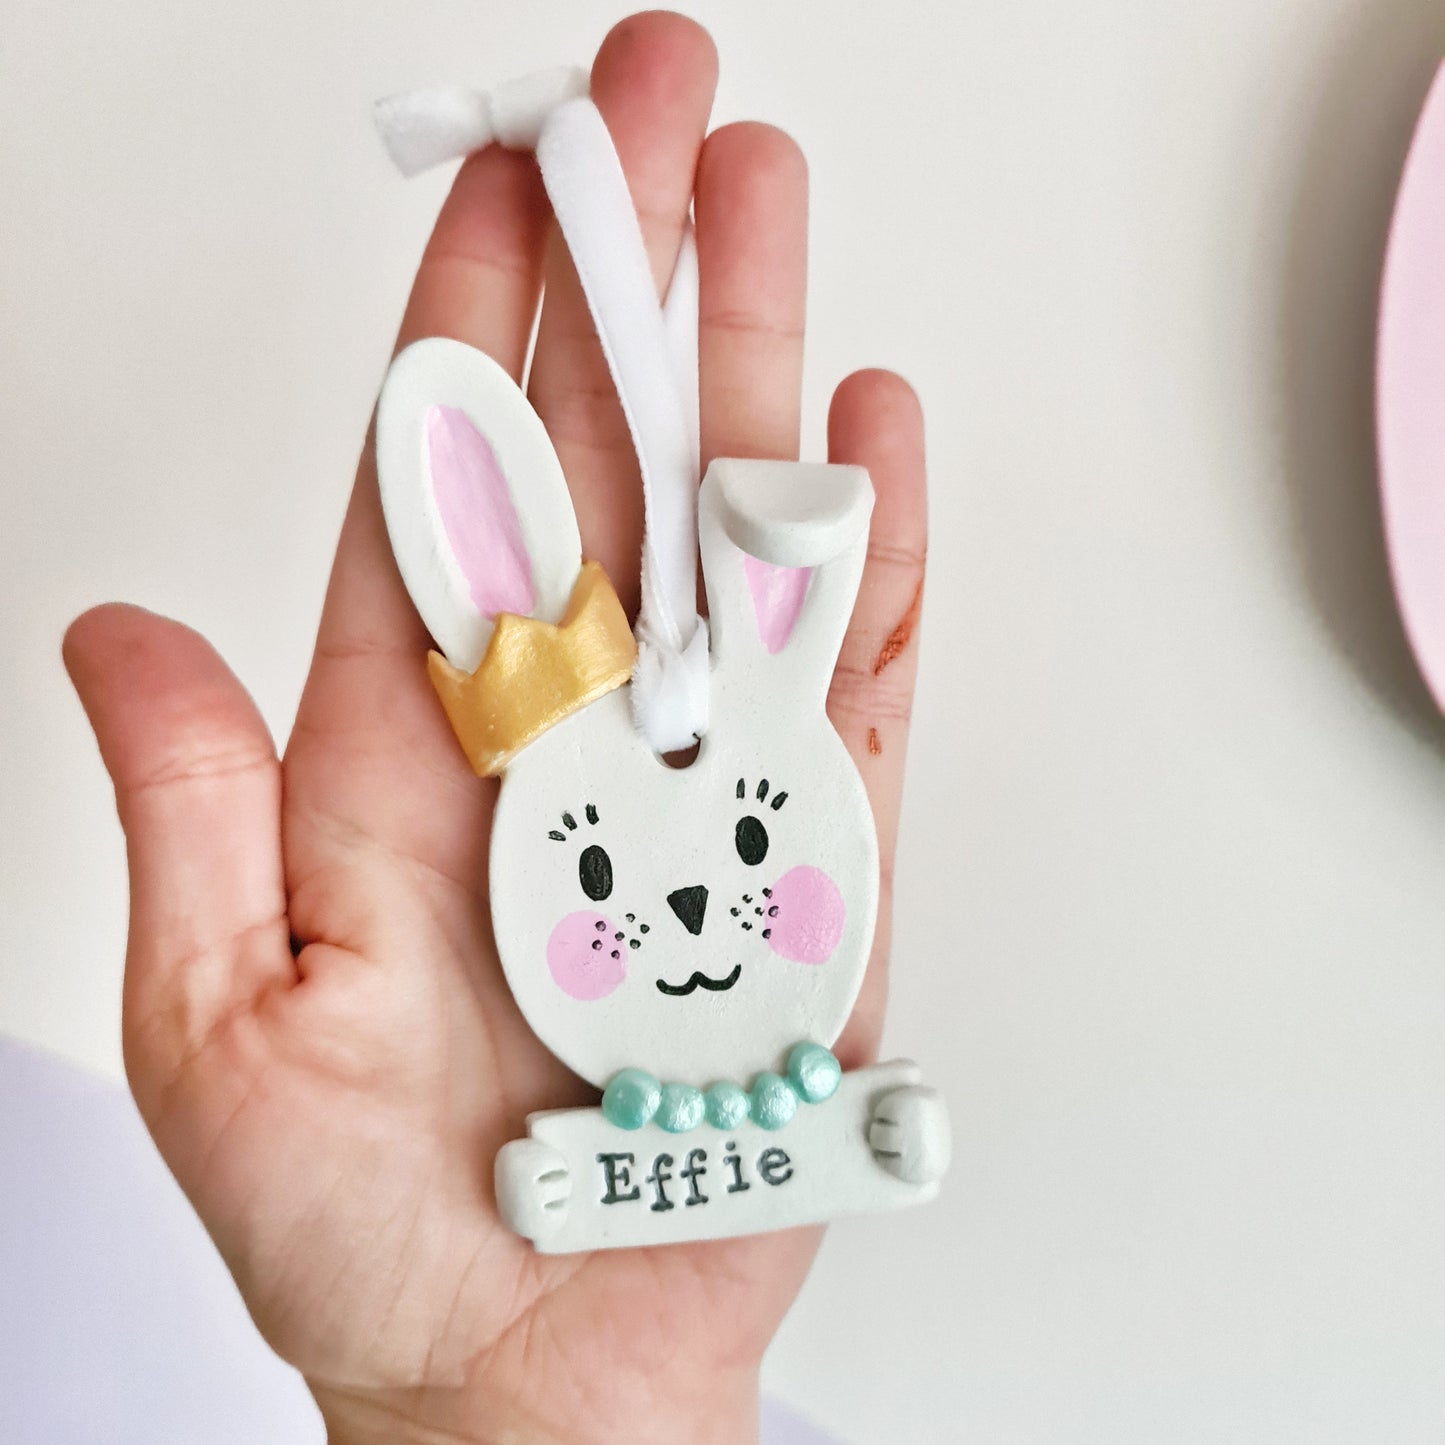 Personalised hanging bunny